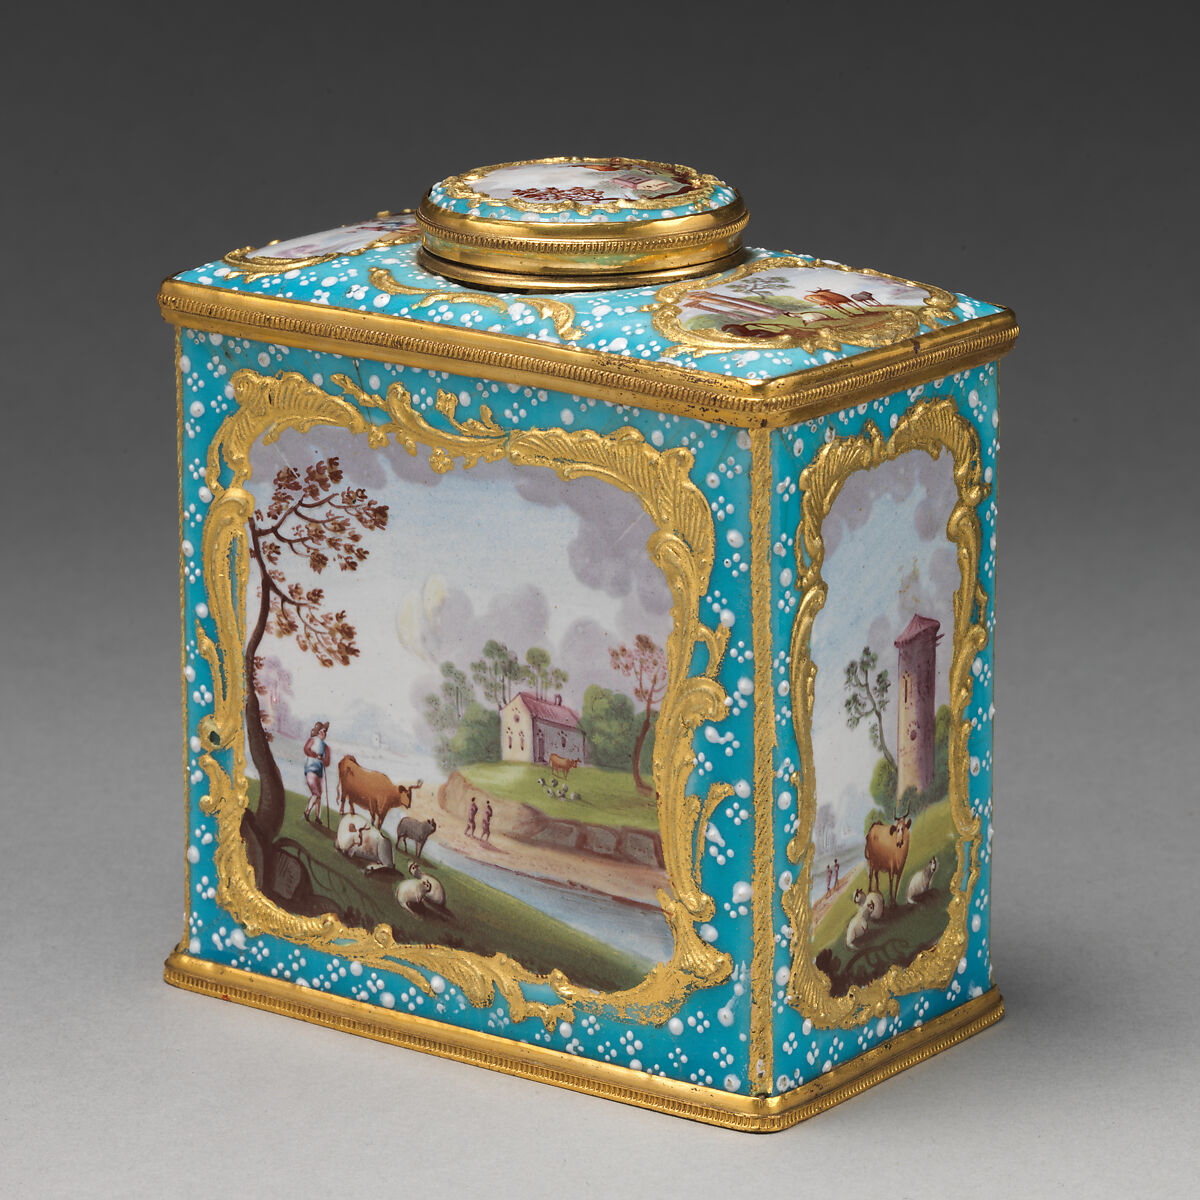 Tea caddy (one of a pair), Enamel on copper, British, South Staffordshire 